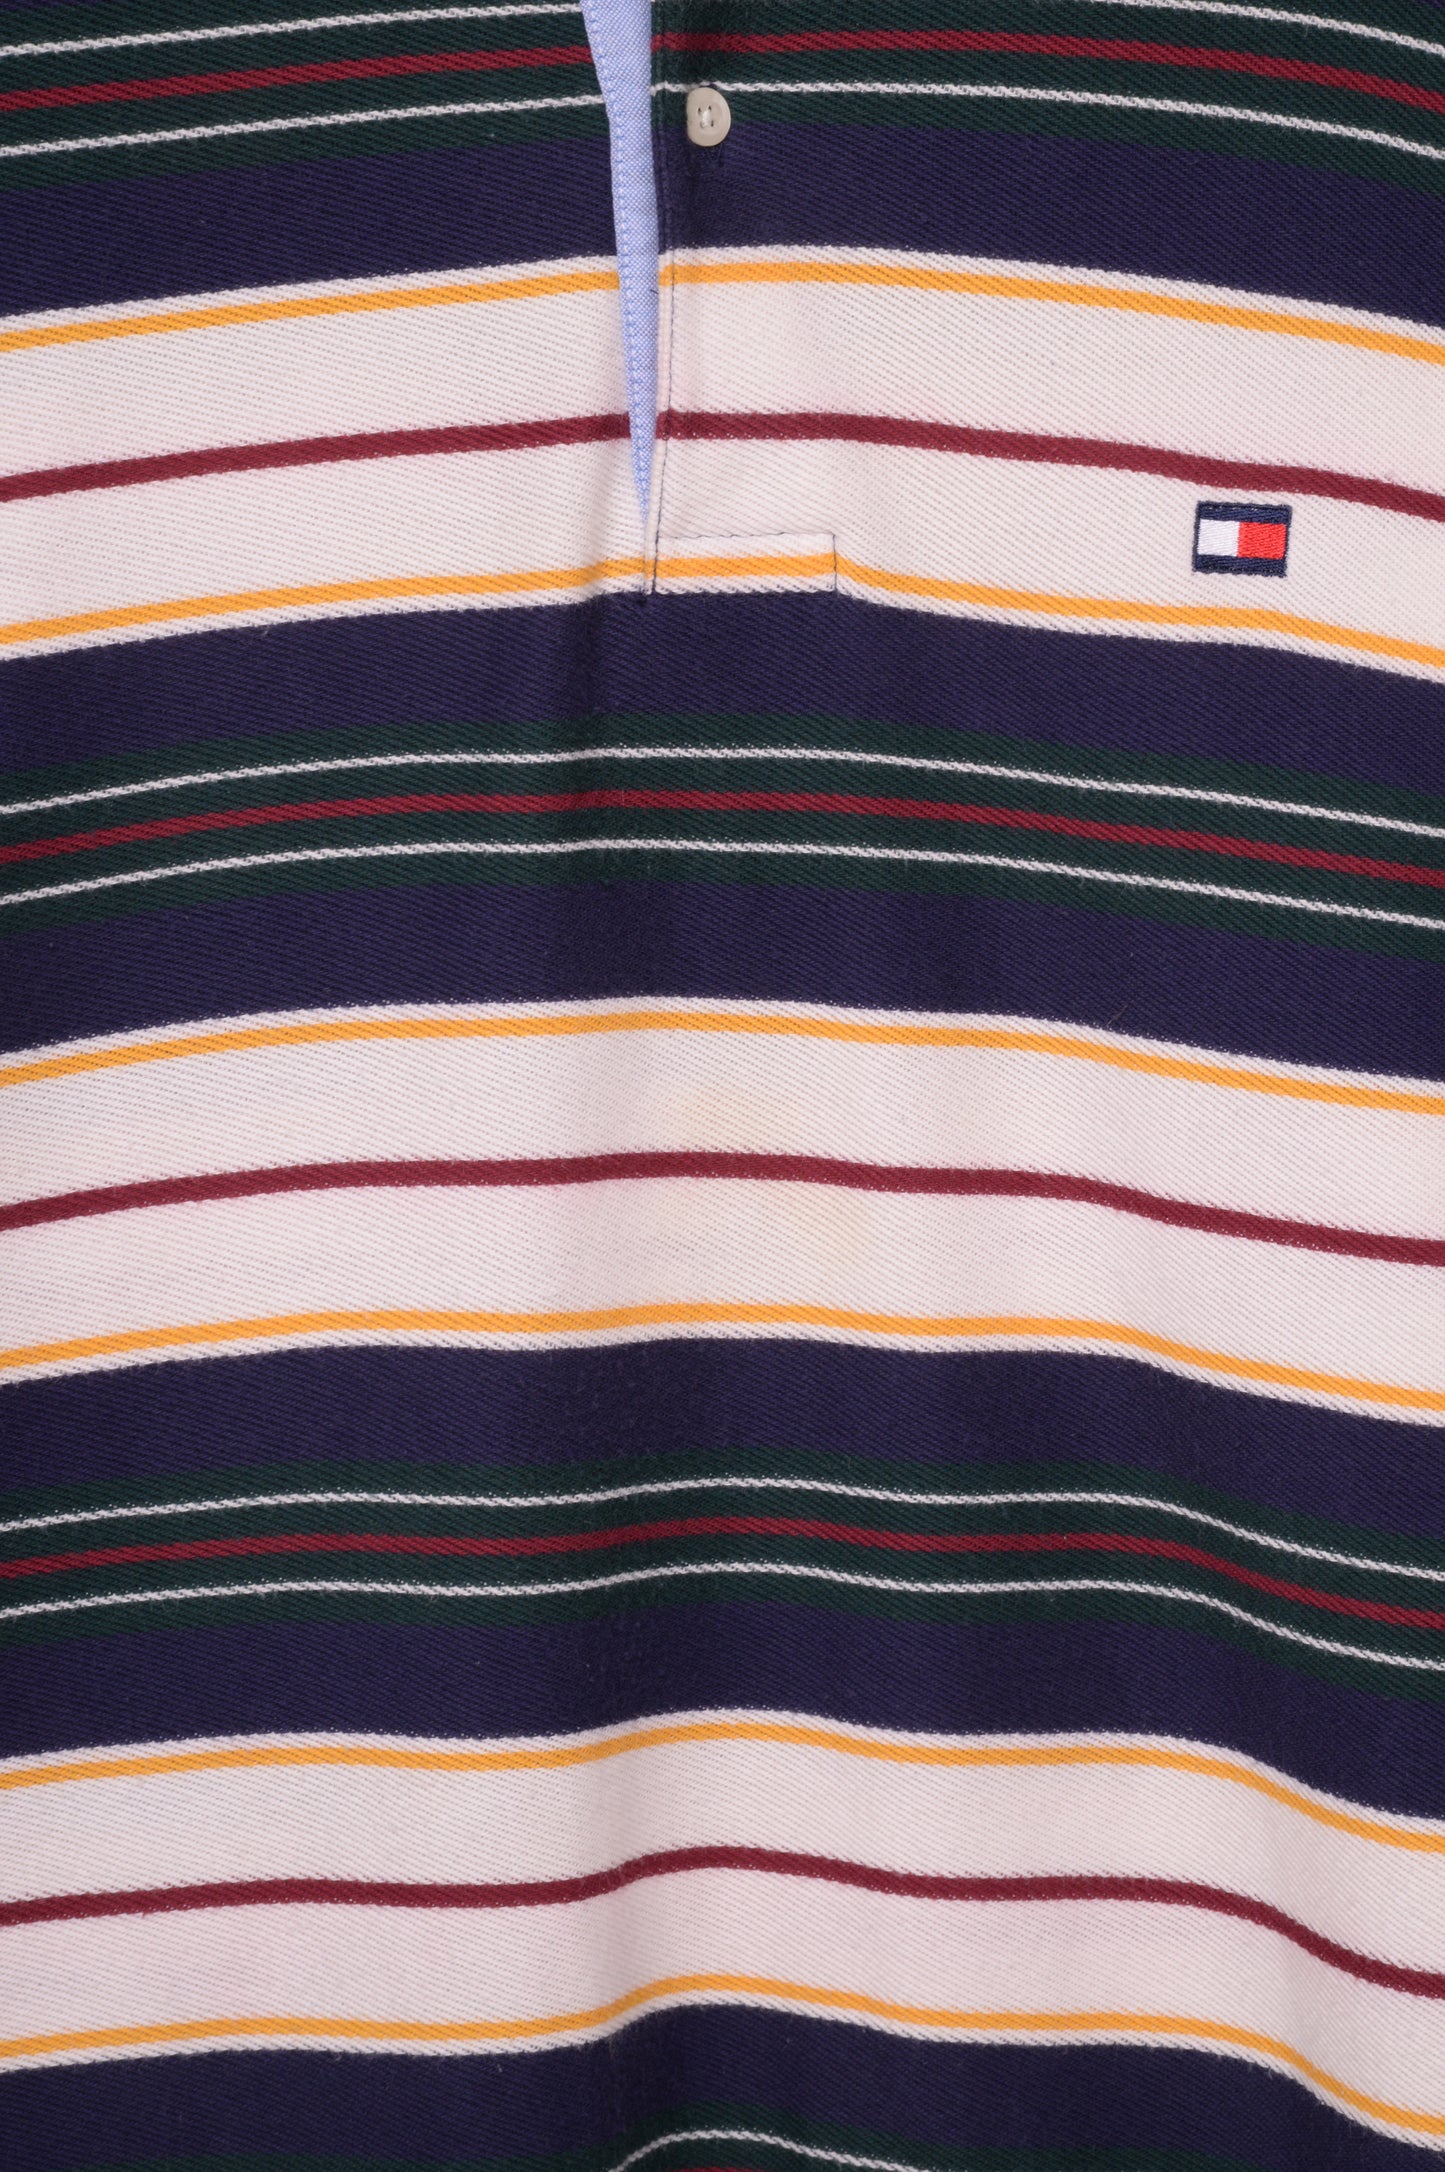 Tommy Hilfiger Rugby Shirt